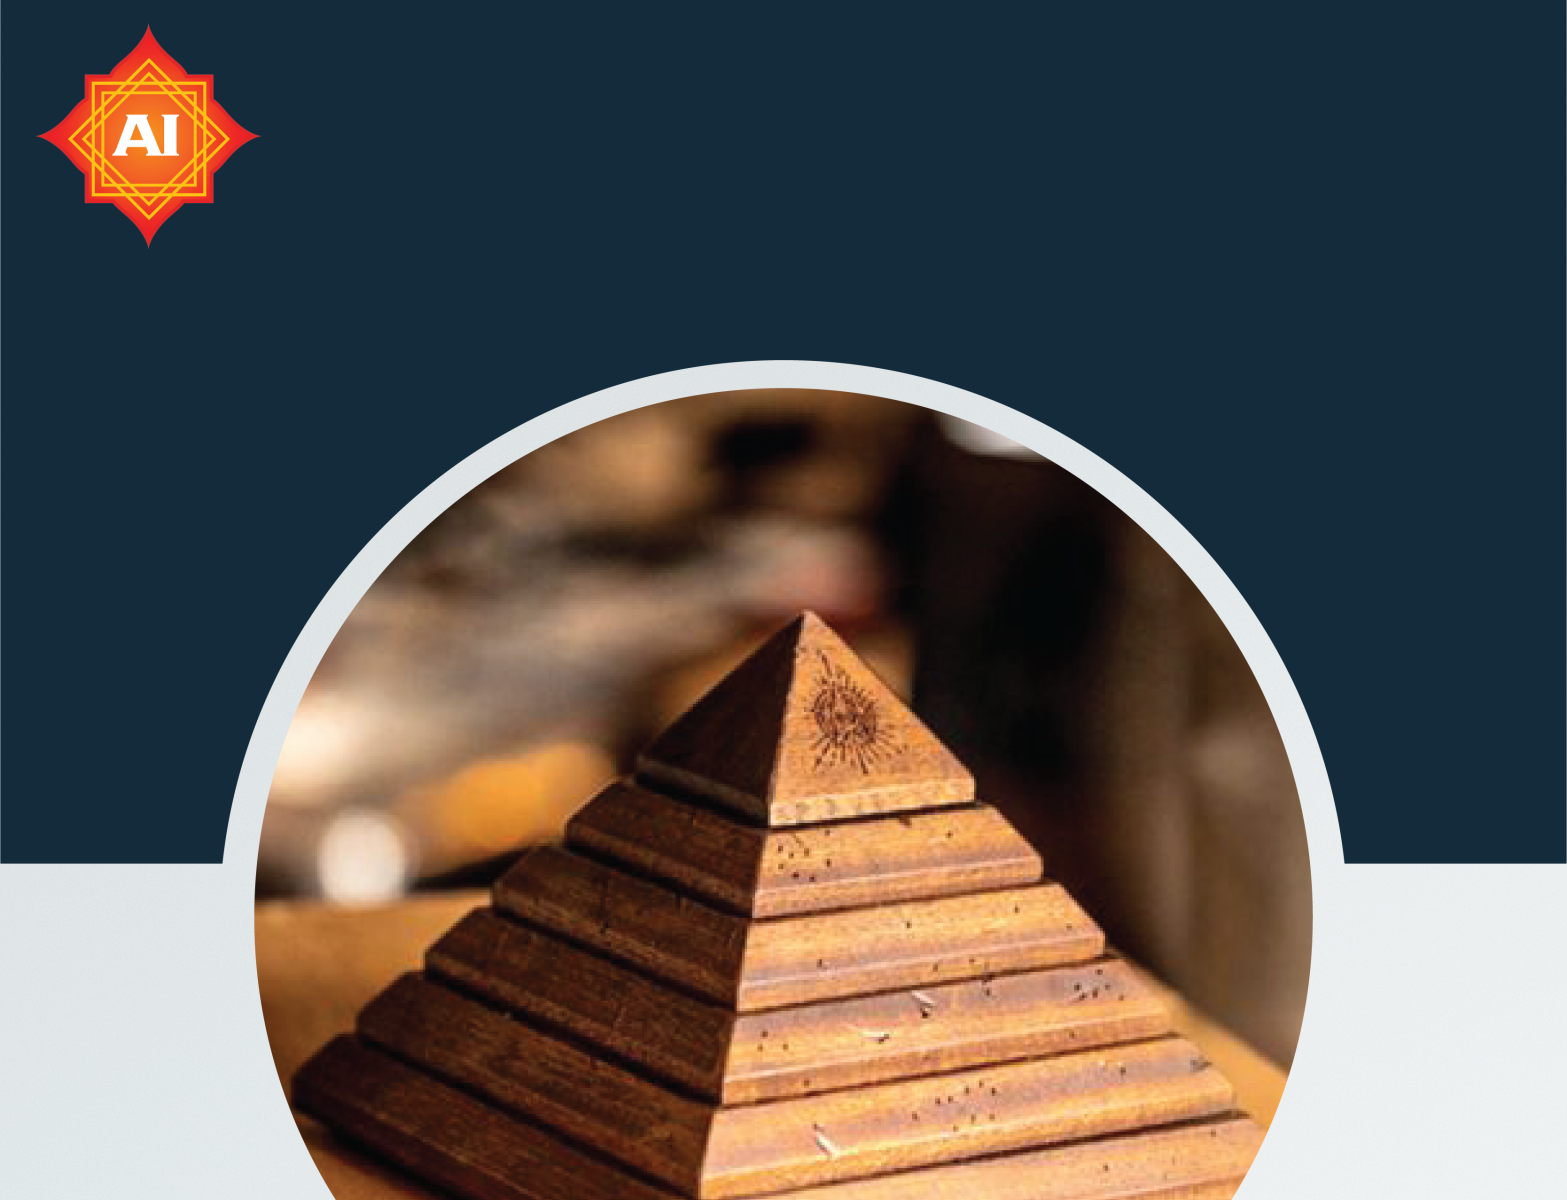 Benefits of Using a Vastu Pyramid by Astro indusoot on Dribbble